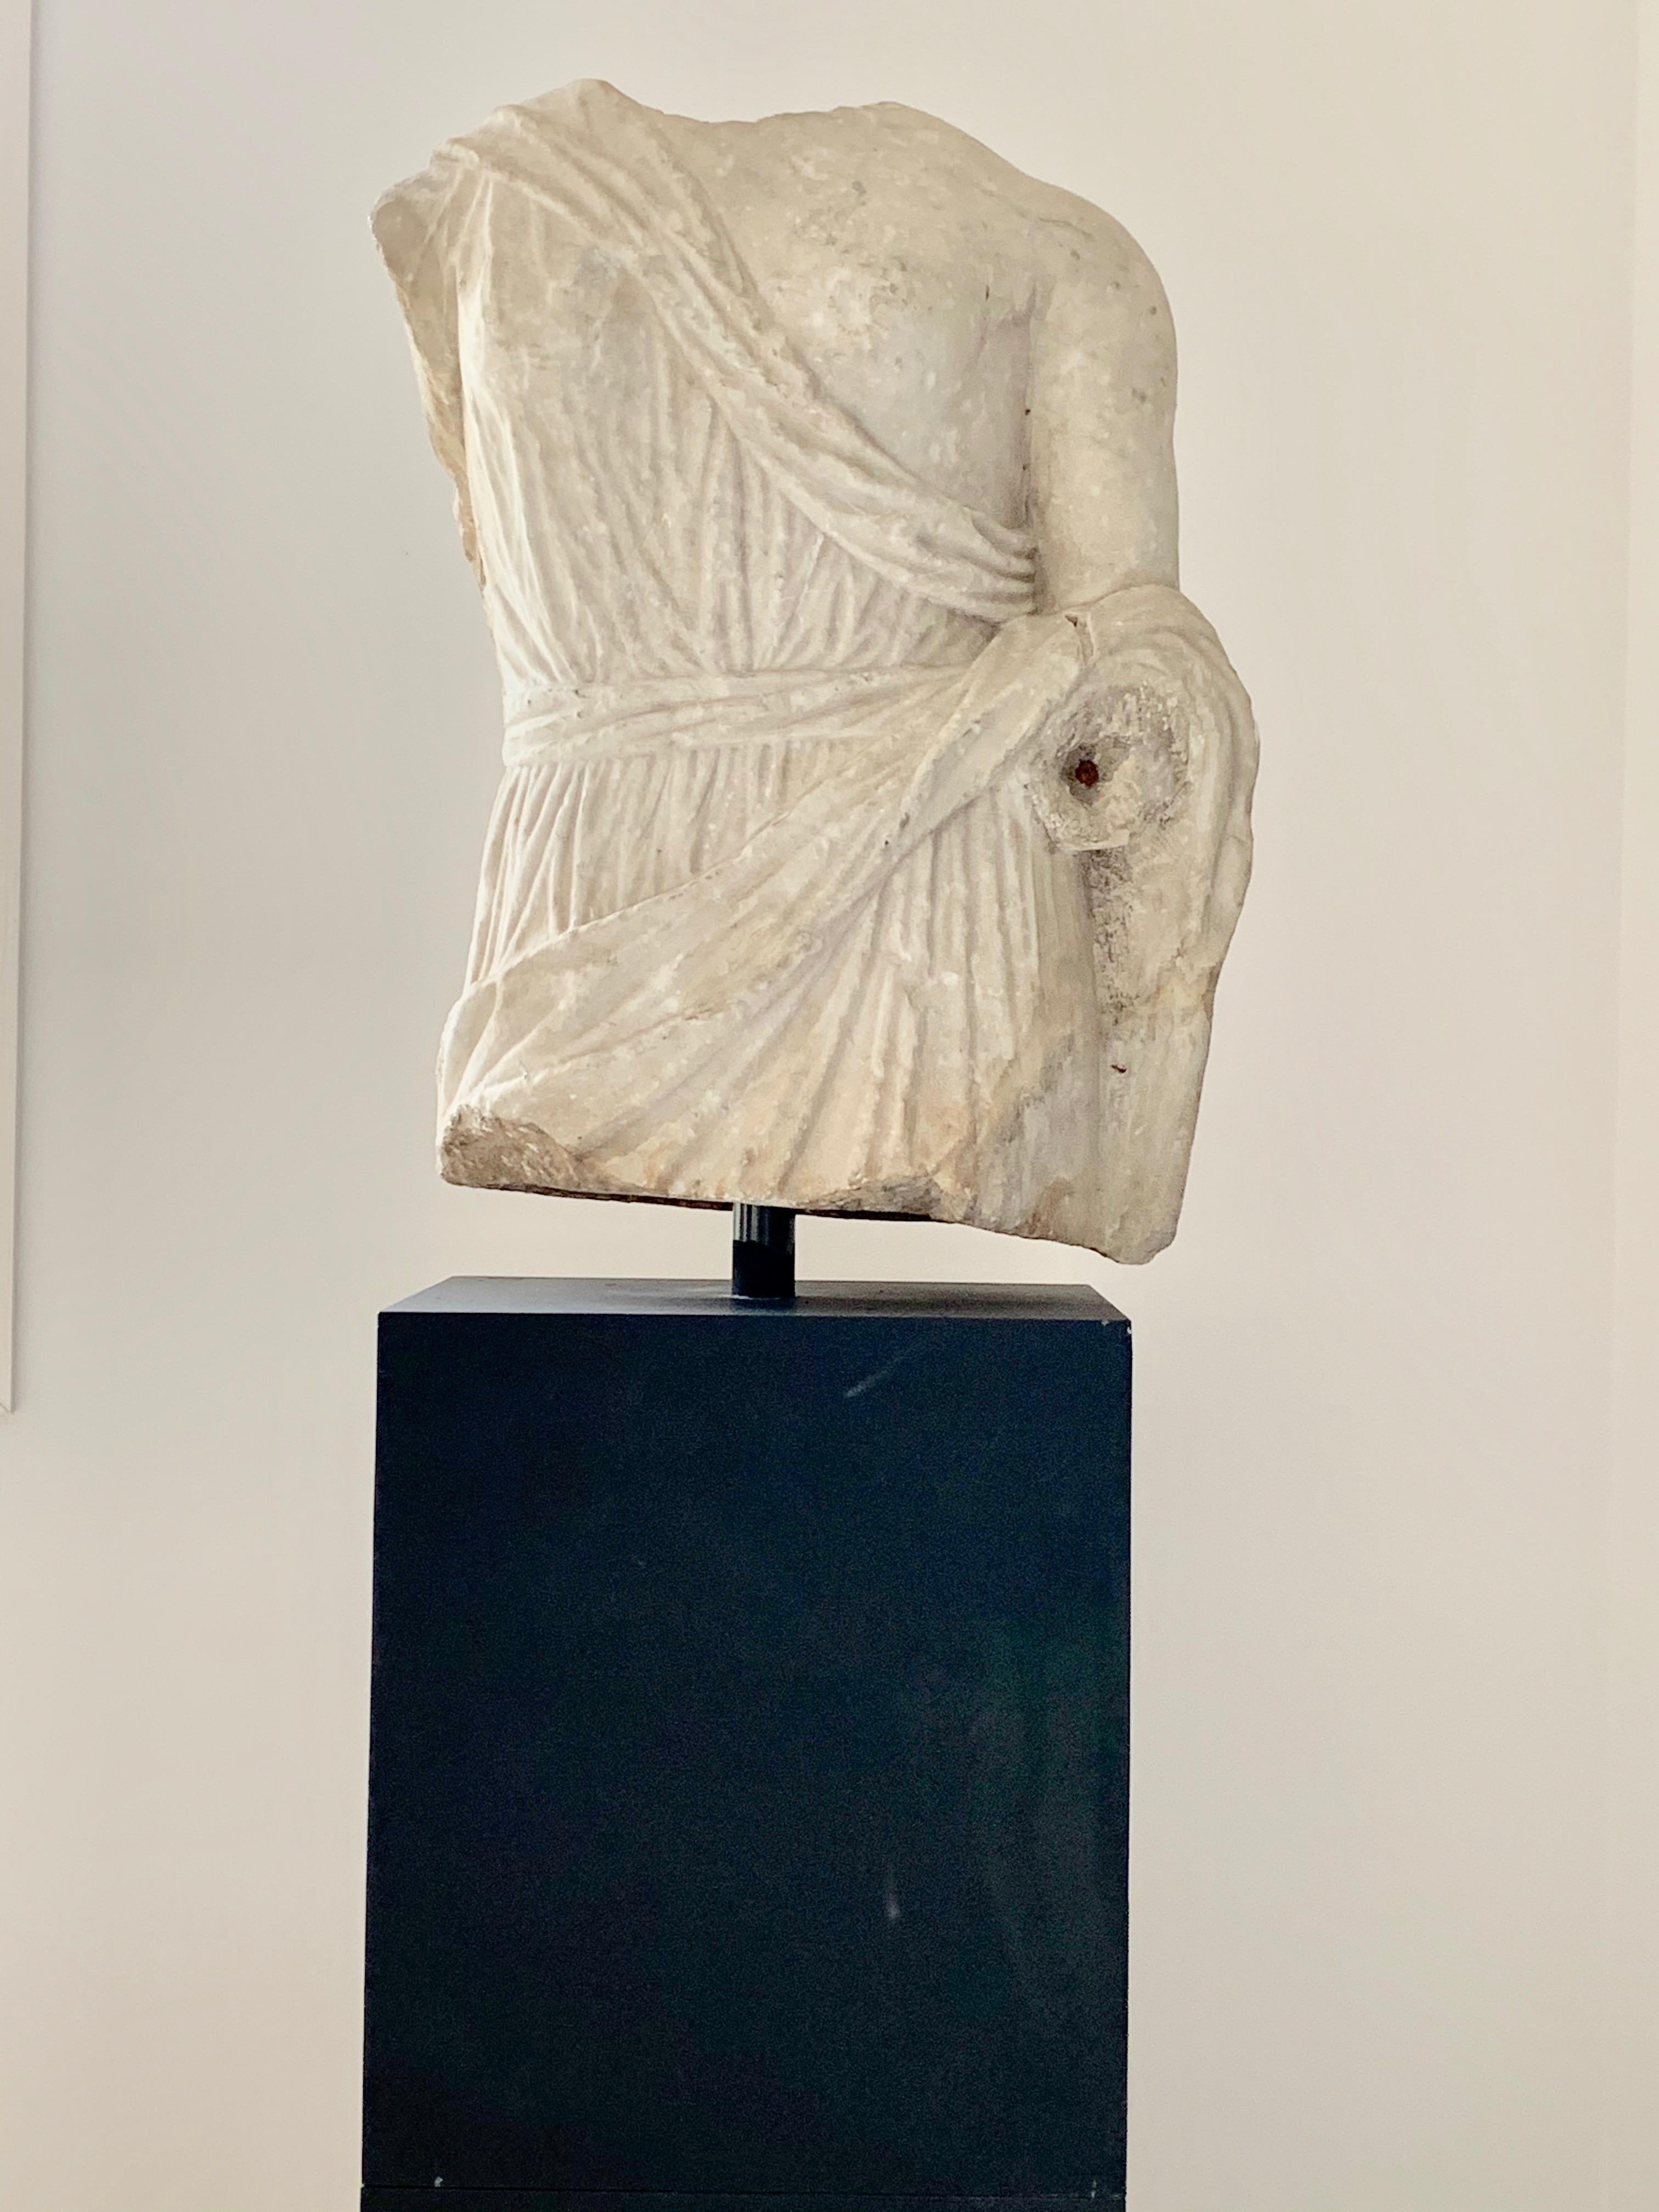 Marble Roman antiquities sculpture of the Goddess Fortuna
Sculpted marble
Exceptional piece
Exceptional opportunity
Exceptionally good vintage condition
2nd century AD, Spain
Dimensions: 20